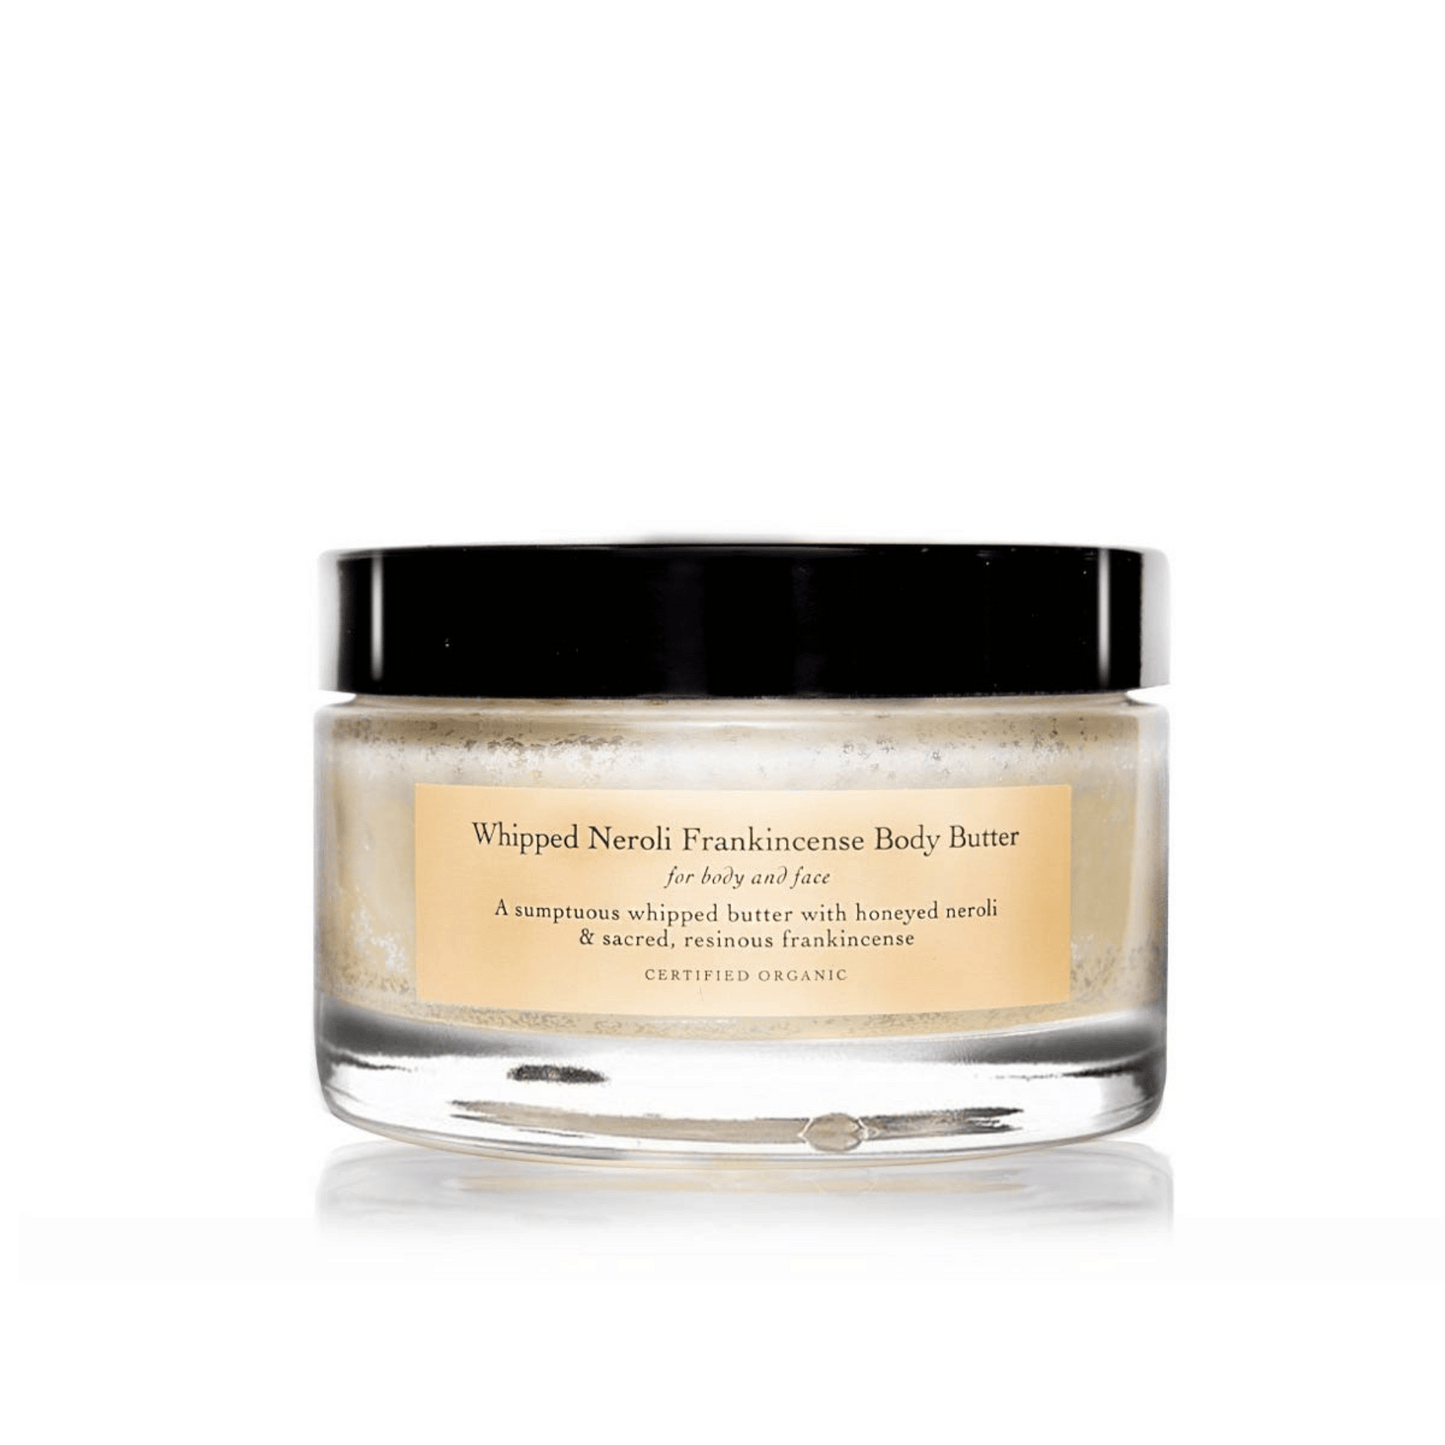 Primary Image of  Whipped Neroli Frankincense Body Butter